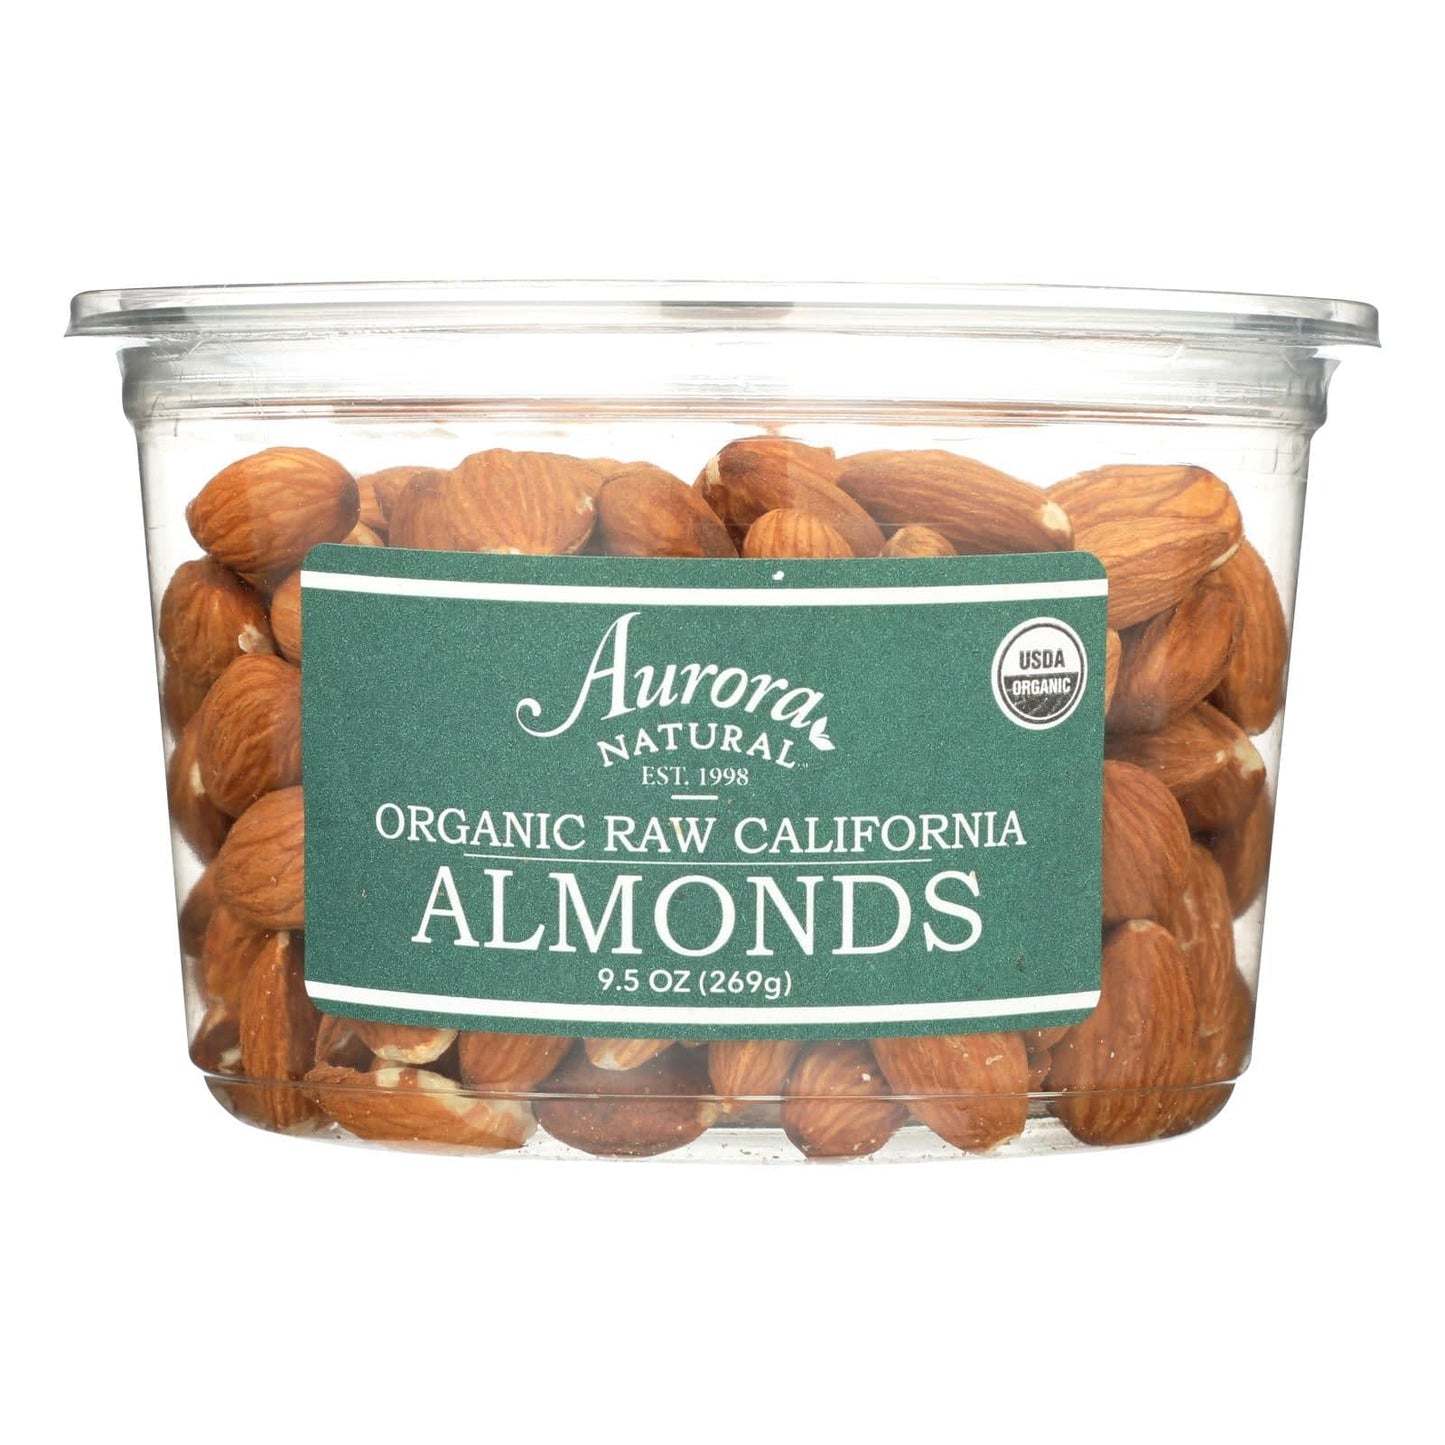 Aurora Natural Products - Organic Raw California Almonds - Case Of 12 - 9.5 Oz. | OnlyNaturals.us